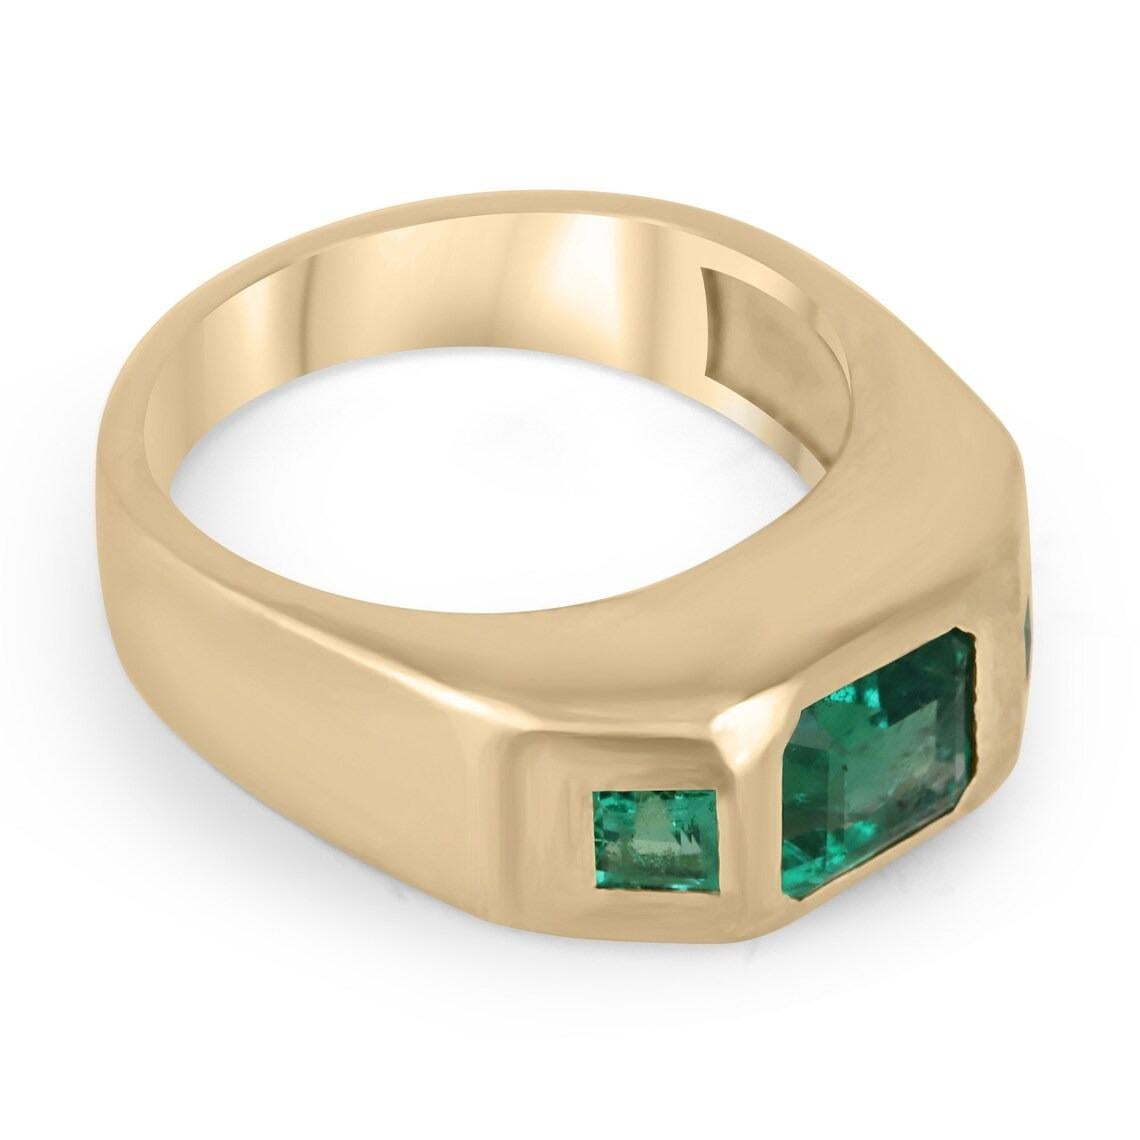 This beautiful three stone ring features an asscher cut emerald as its centerpiece, with two princess cut emeralds on either side, creating a stunning trio of green stones. The emeralds are set in a 14k gold bezel setting with a matte finish, giving